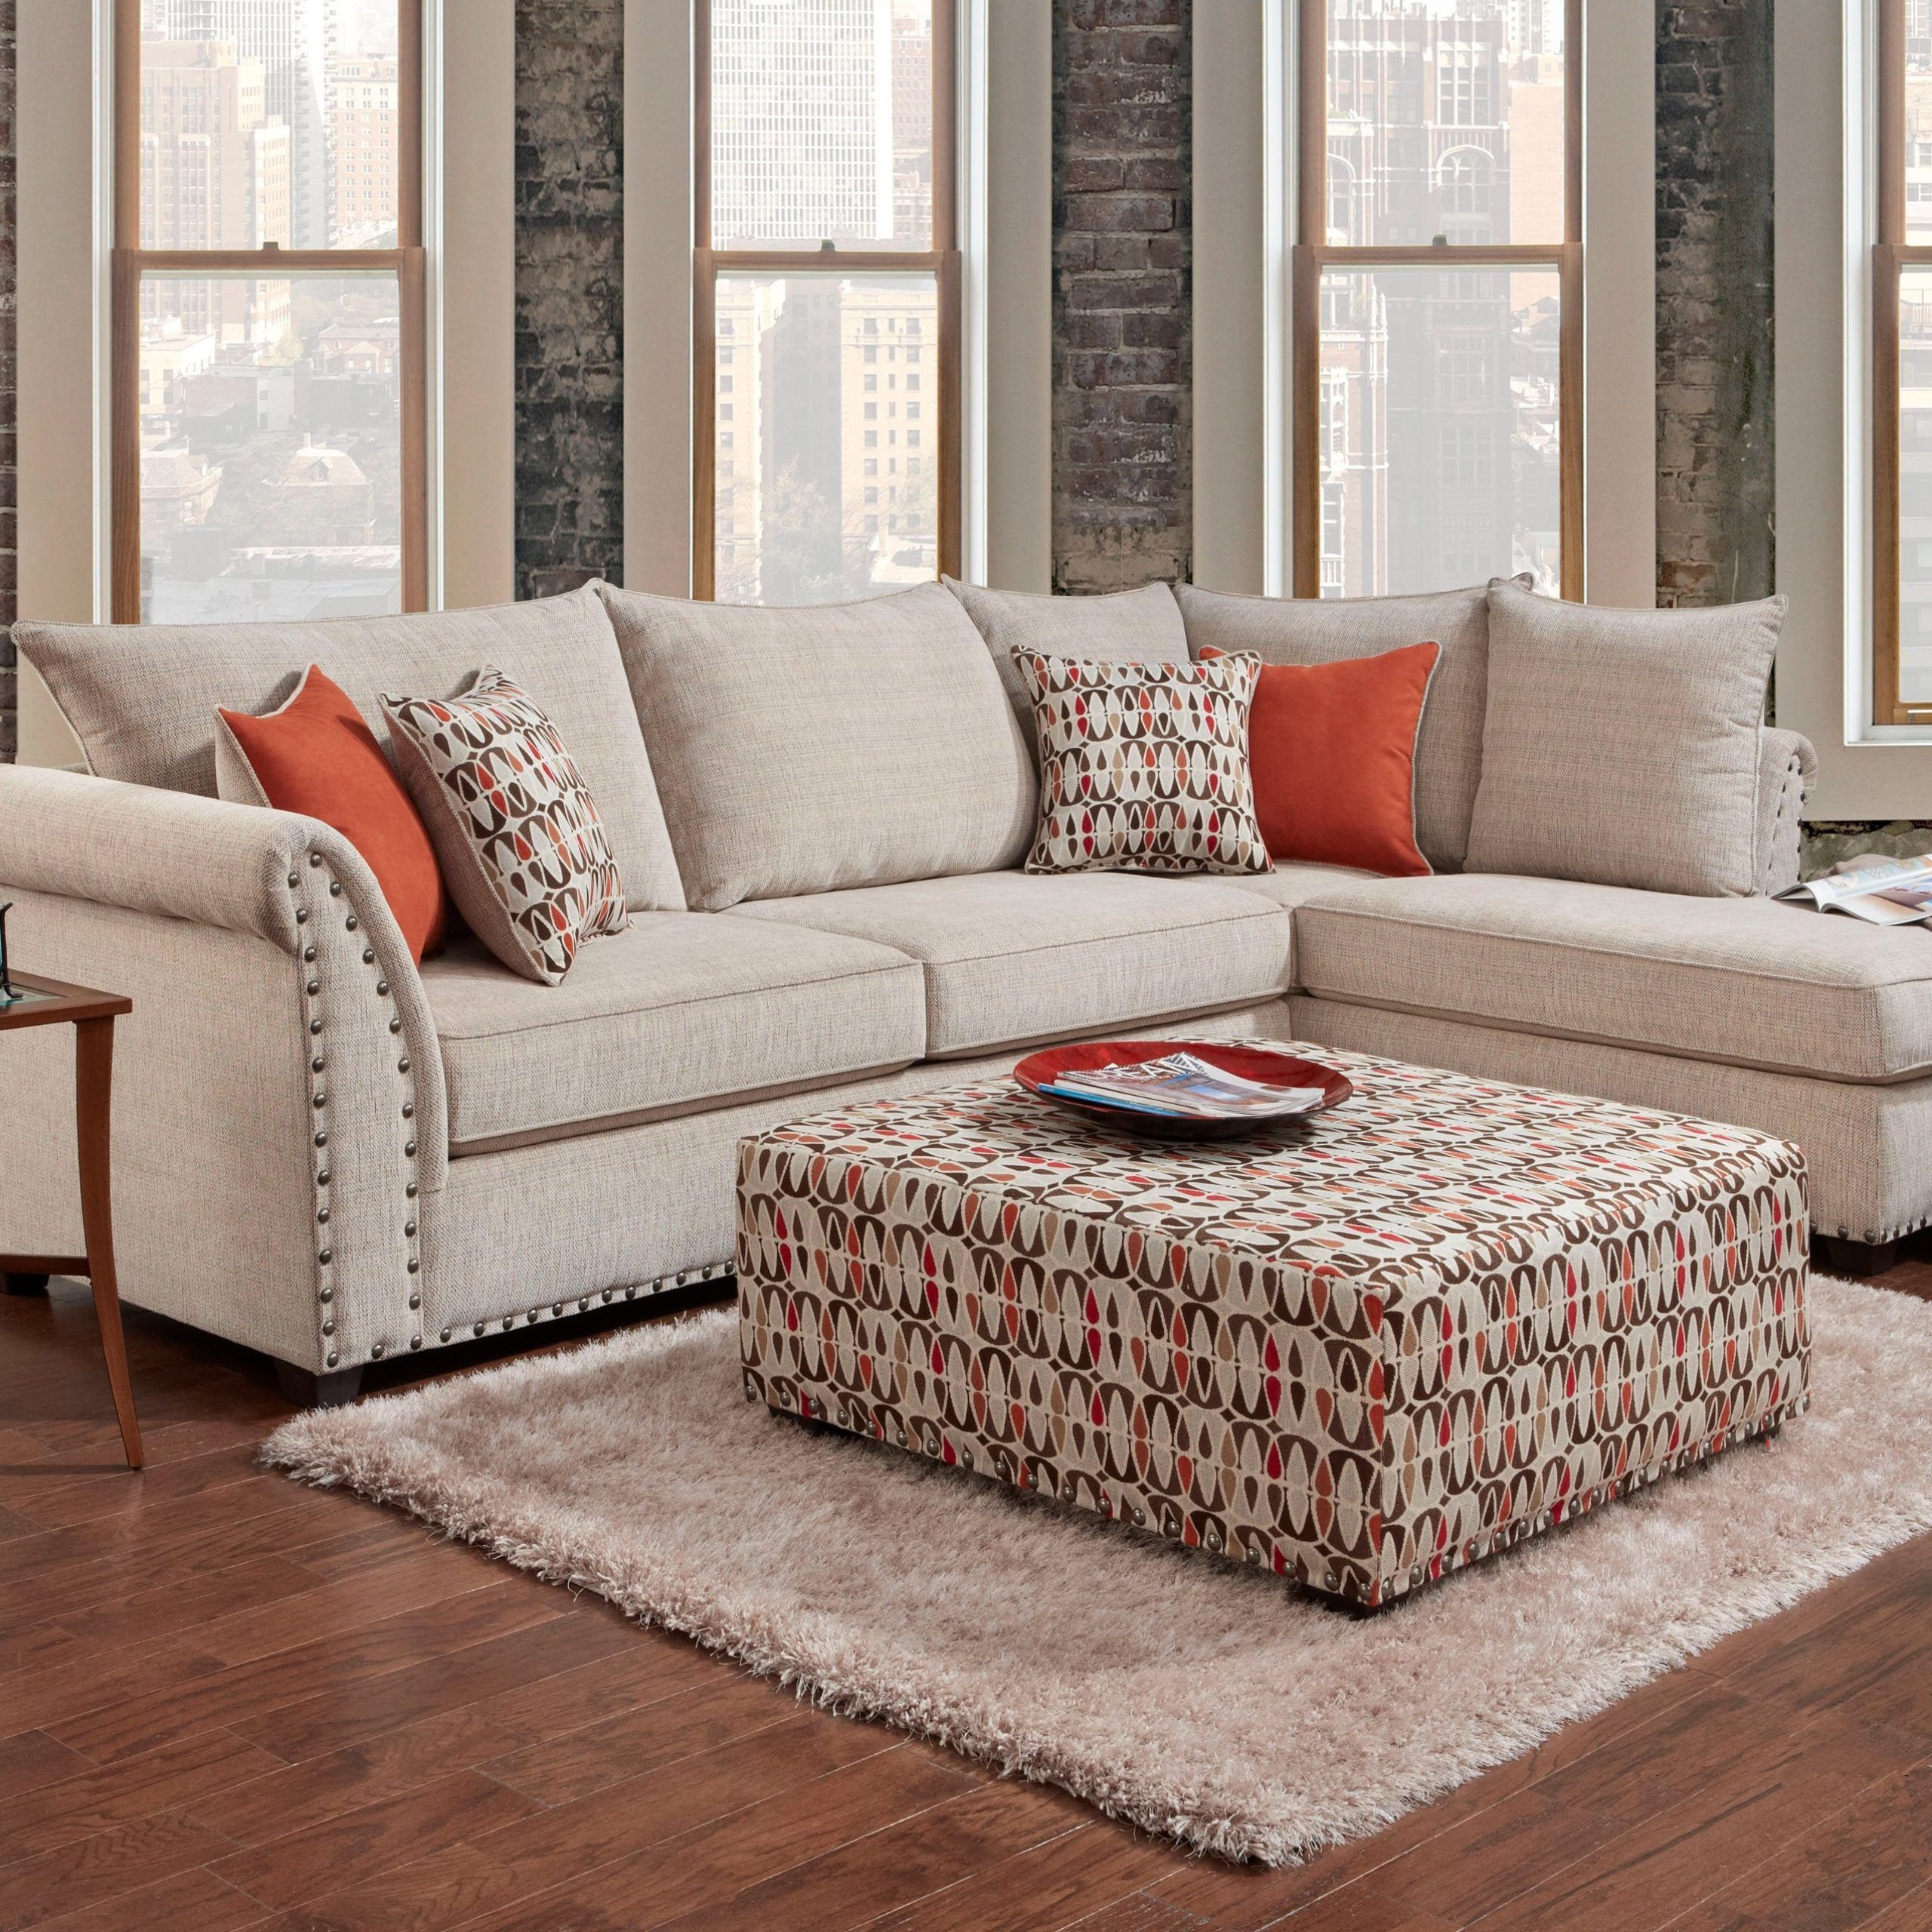 Patton Beige Sectional Sofa Set – Afurniturecompany For Beige L Shaped Sectional Sofas (Gallery 16 of 20)